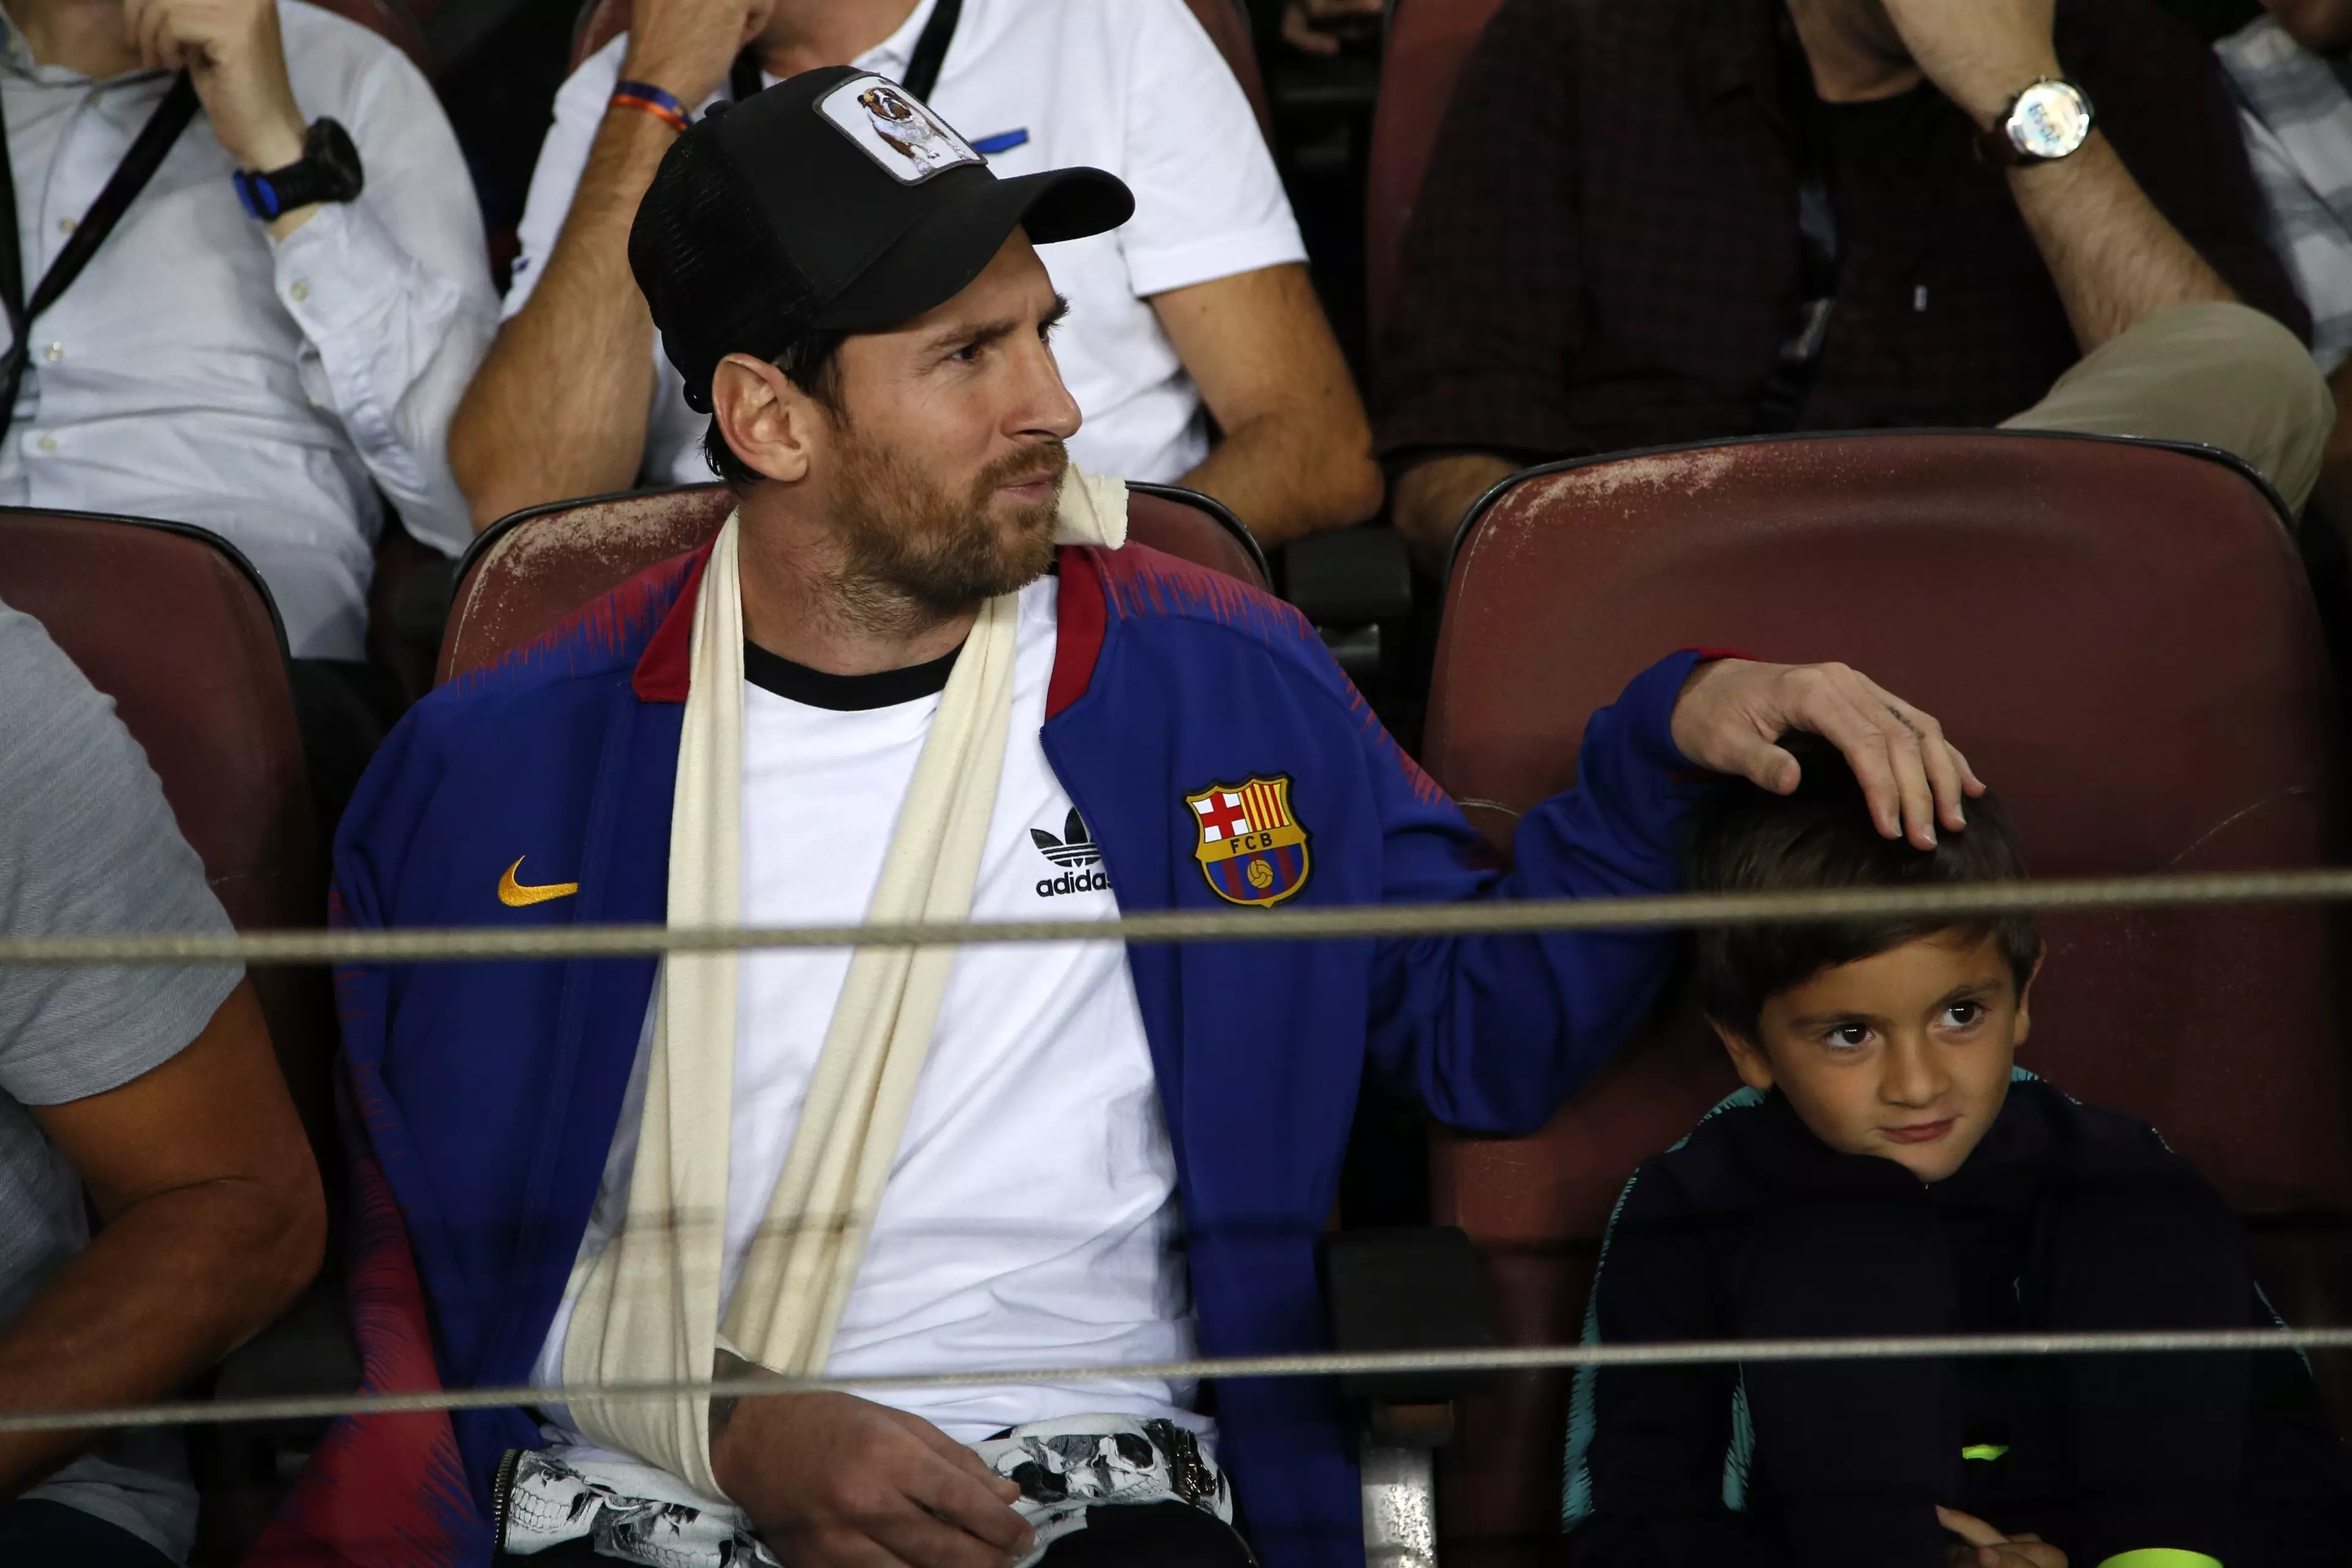 Looks like little Thiago prefers watching his dad play. Image: PA Images